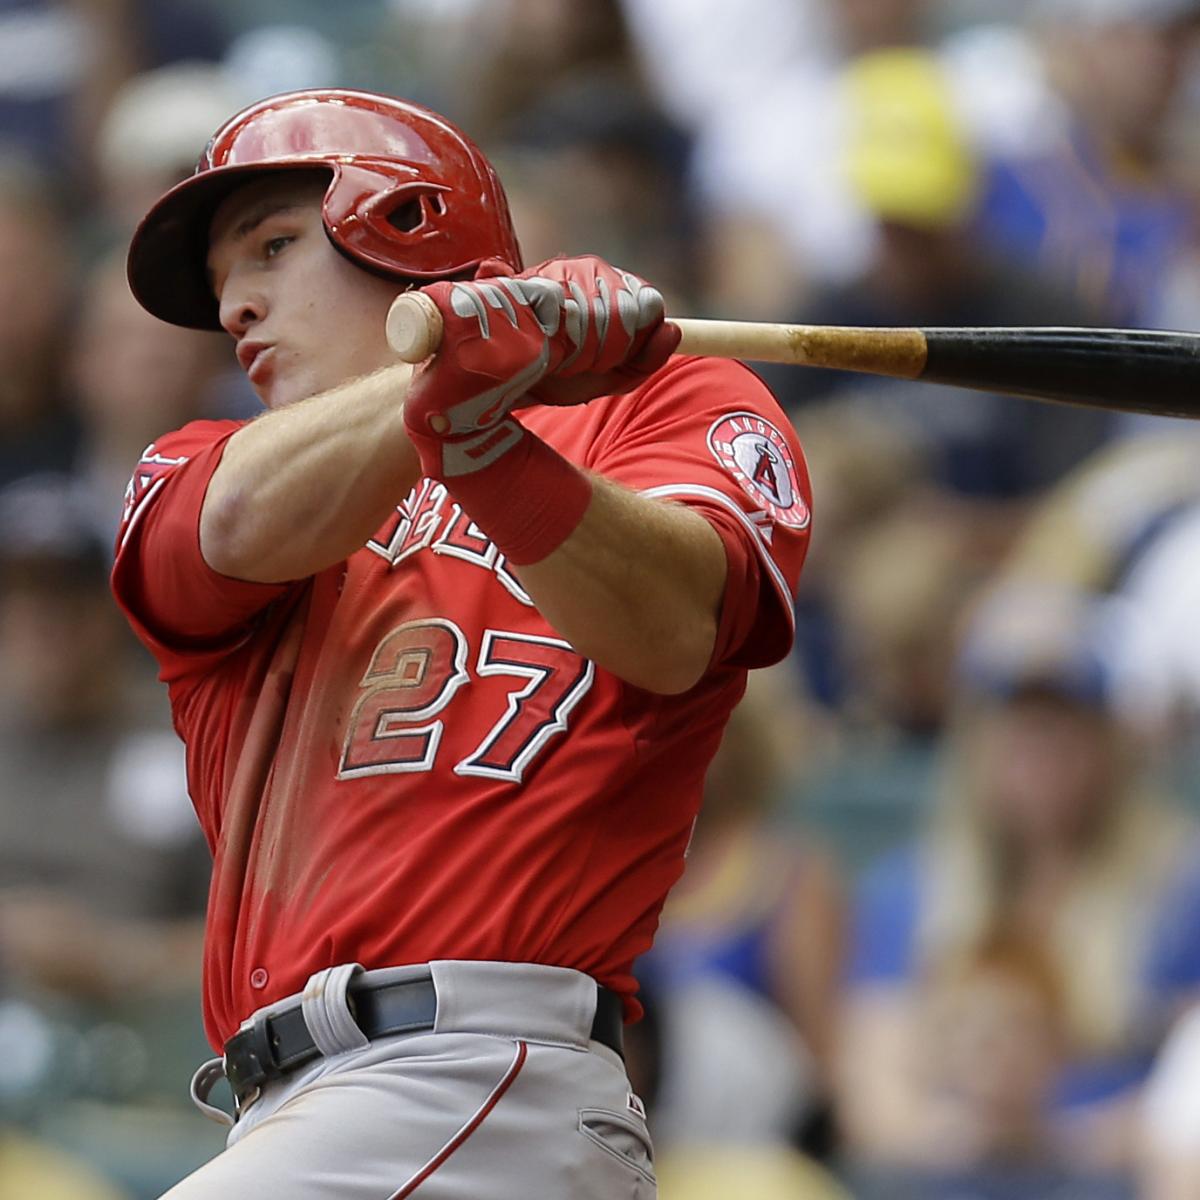 Fantasy Baseball 2014 Ideal Draft Strategy, Top Sleepers and Player